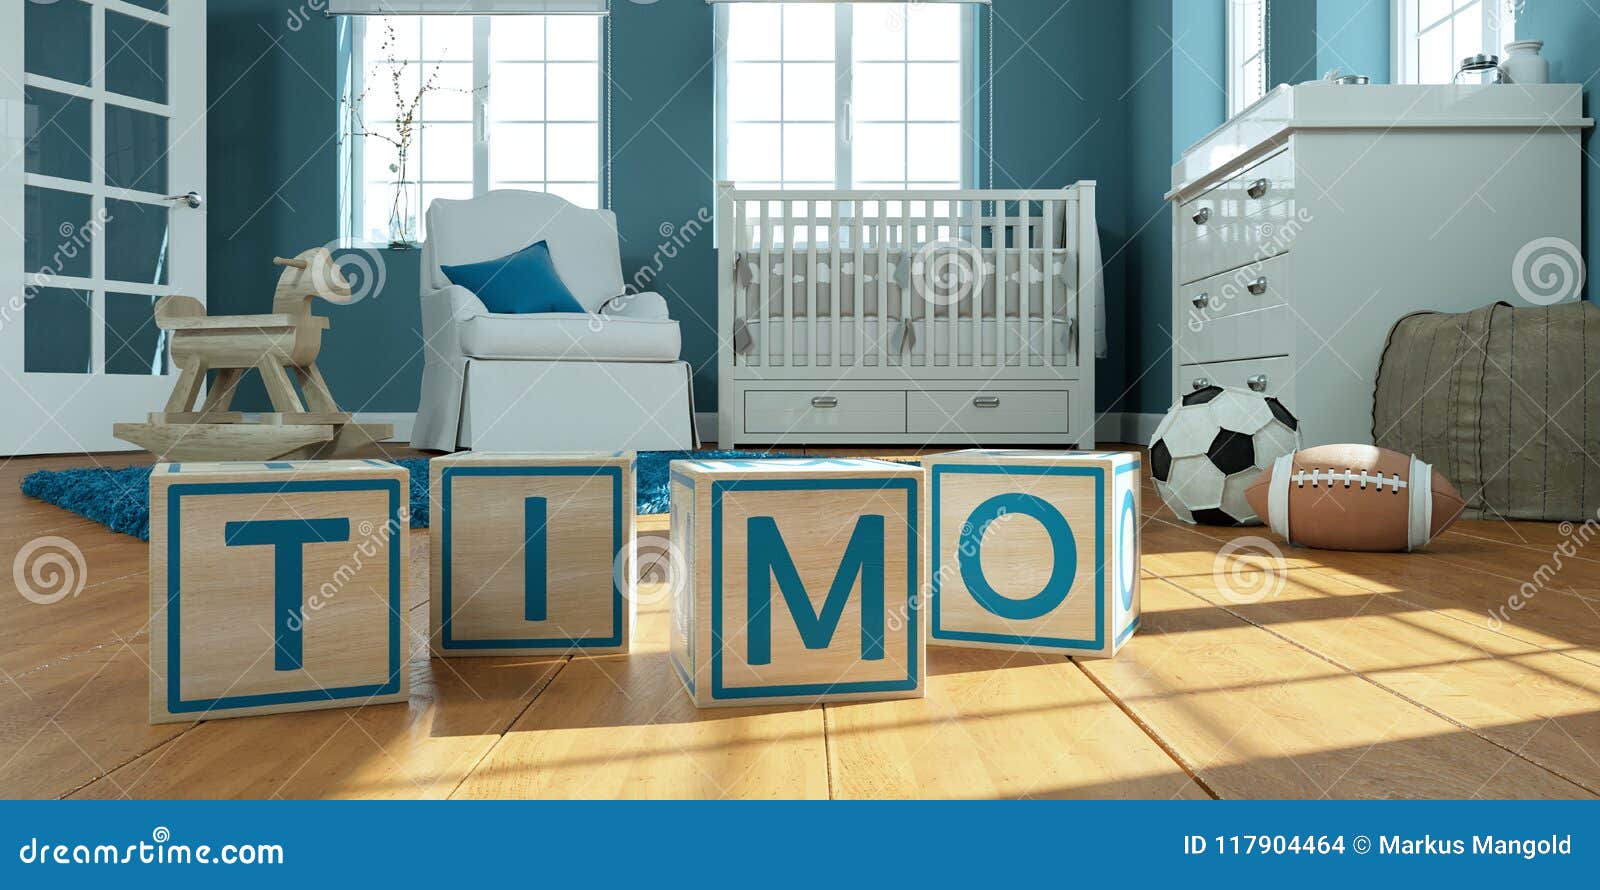 the name timo written with wooden toy cubes in children`s room